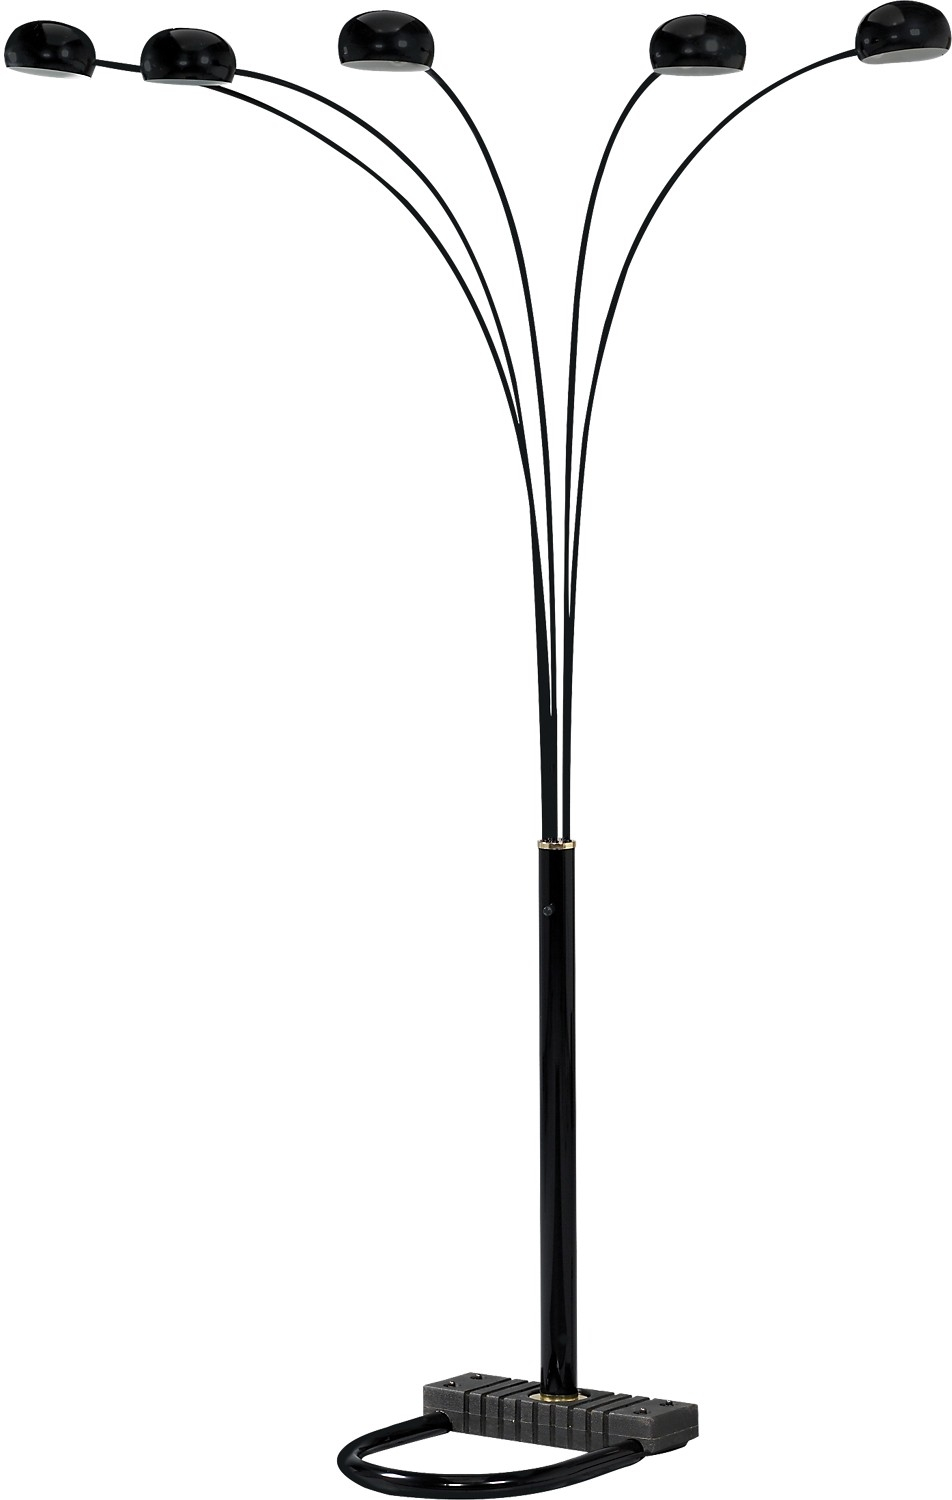 Glass Art In Your Home Peacock Floor Lamp Warisan Lighting intended for sizing 952 X 1500